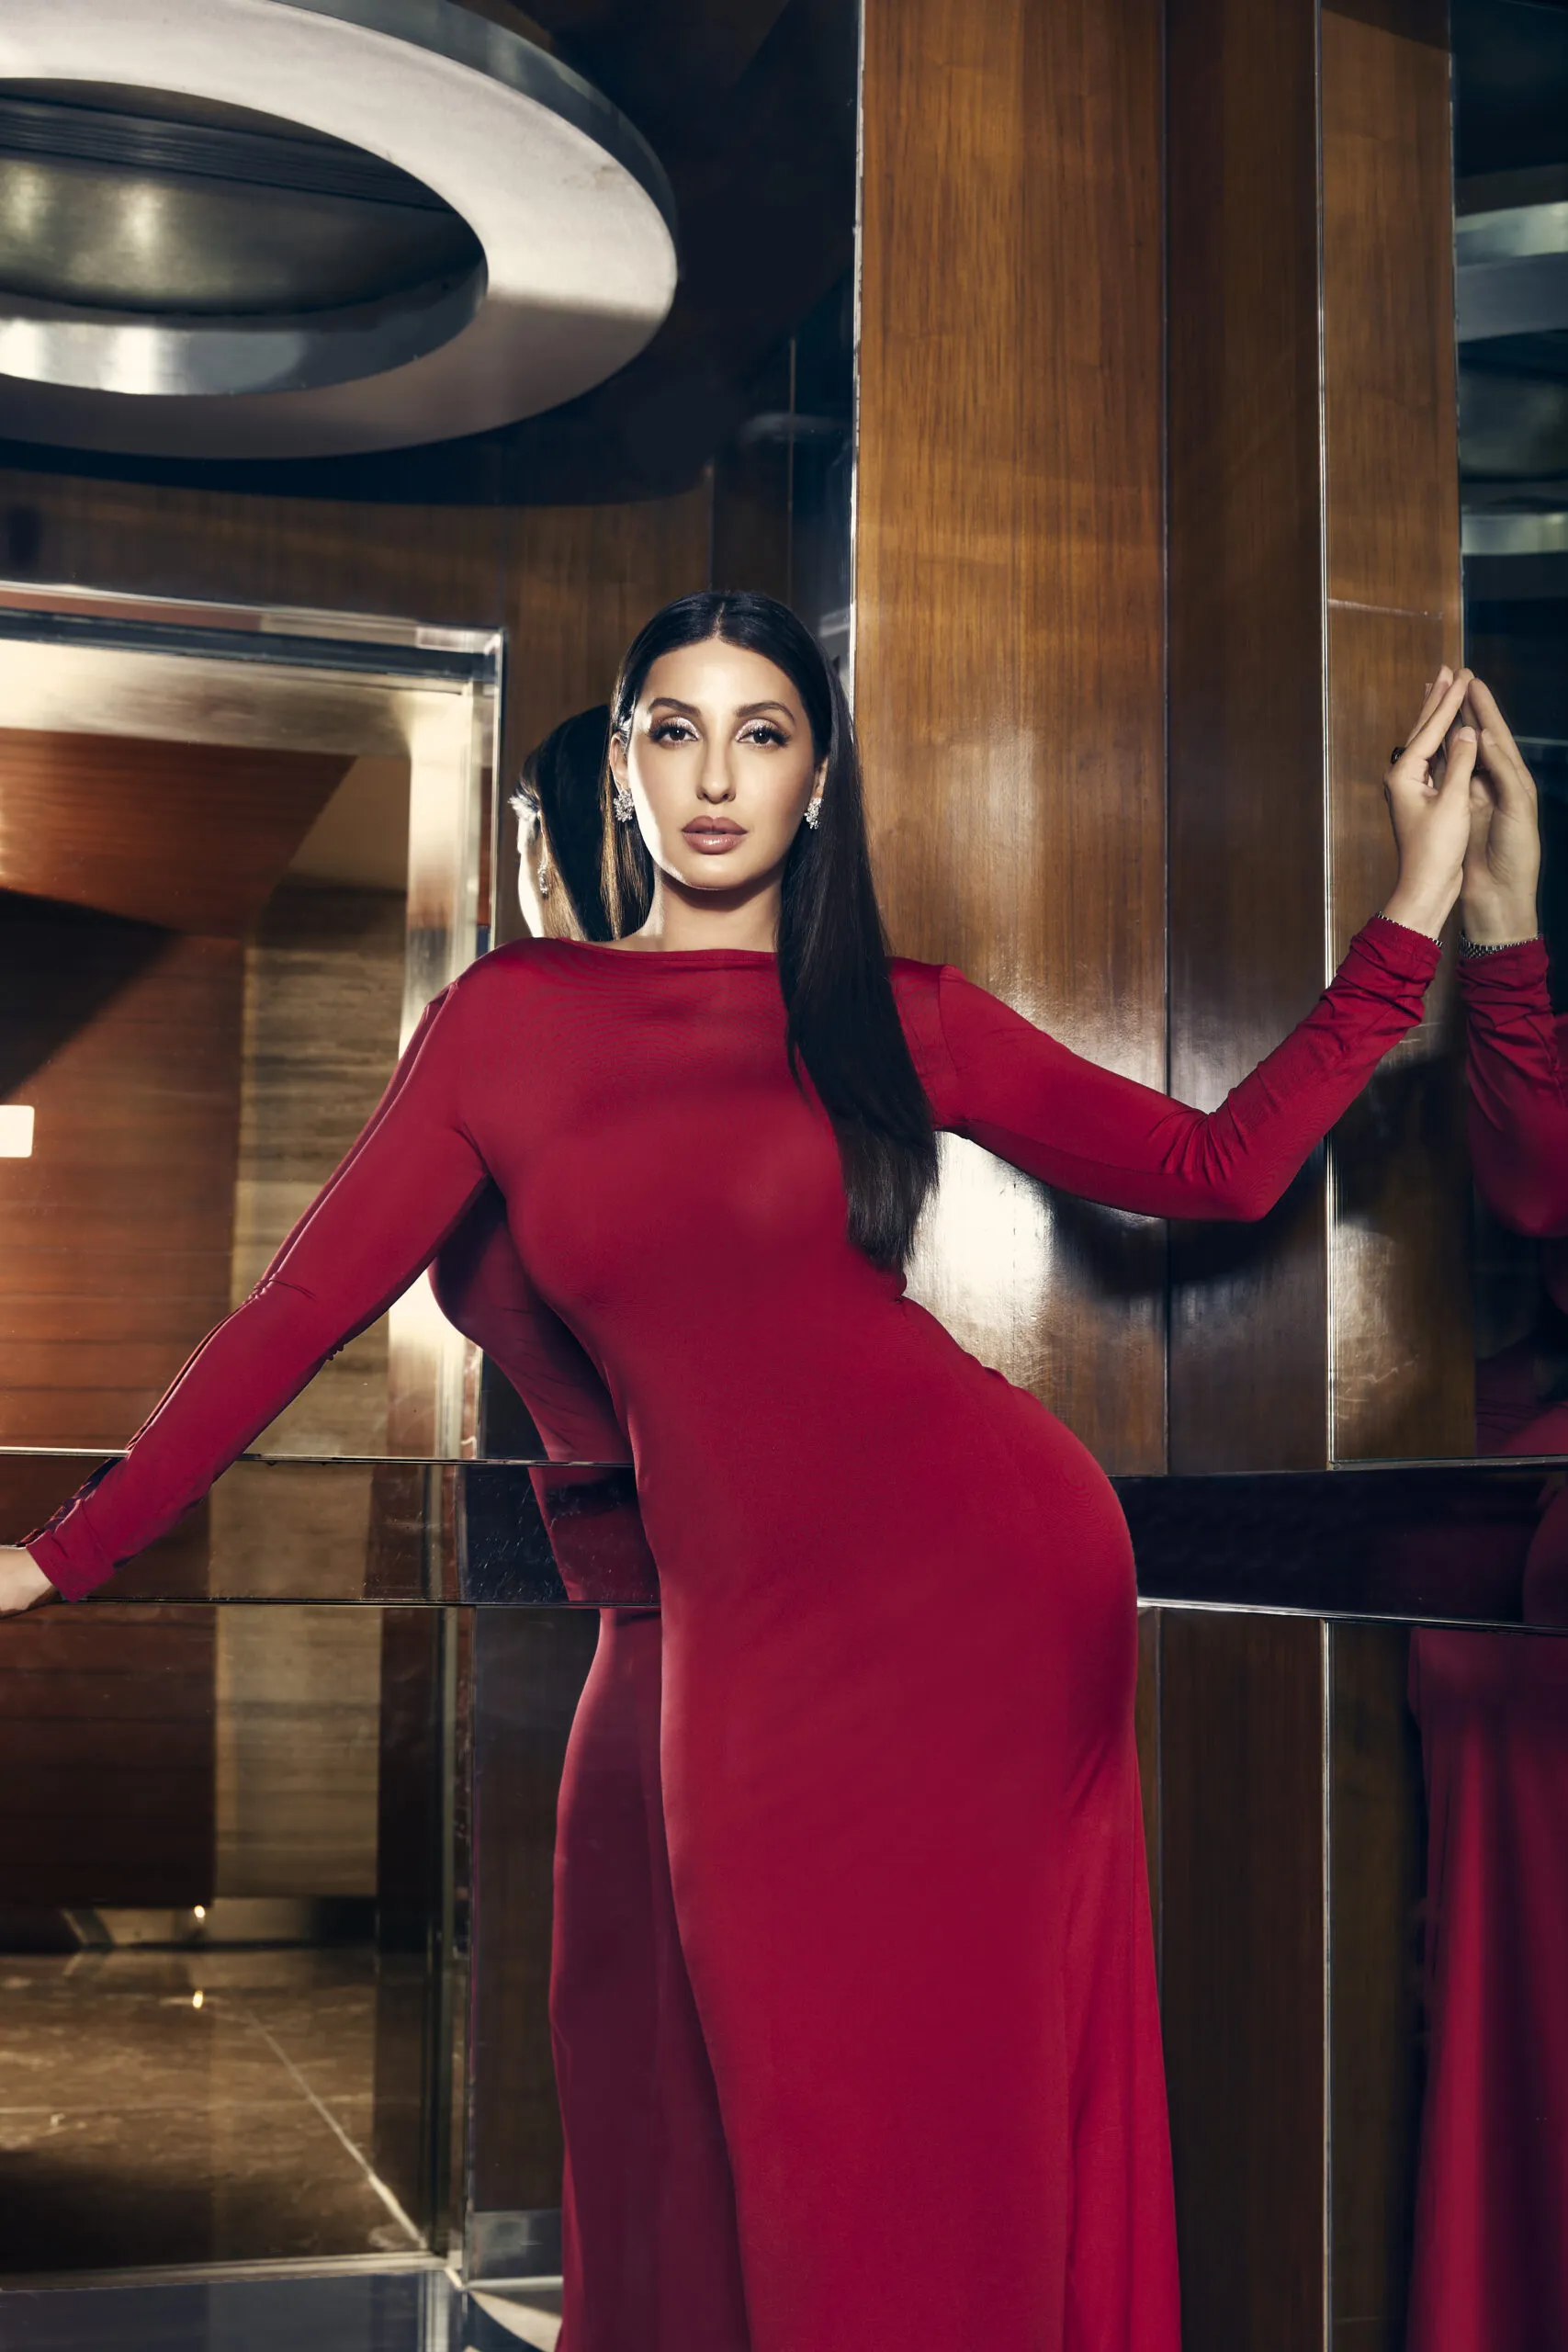 GLOBAL SUPERSTAR NORA FATEHI SIGNS RECORD DEAL WITH WARNER MUSIC GROUP -  Warner Music Group